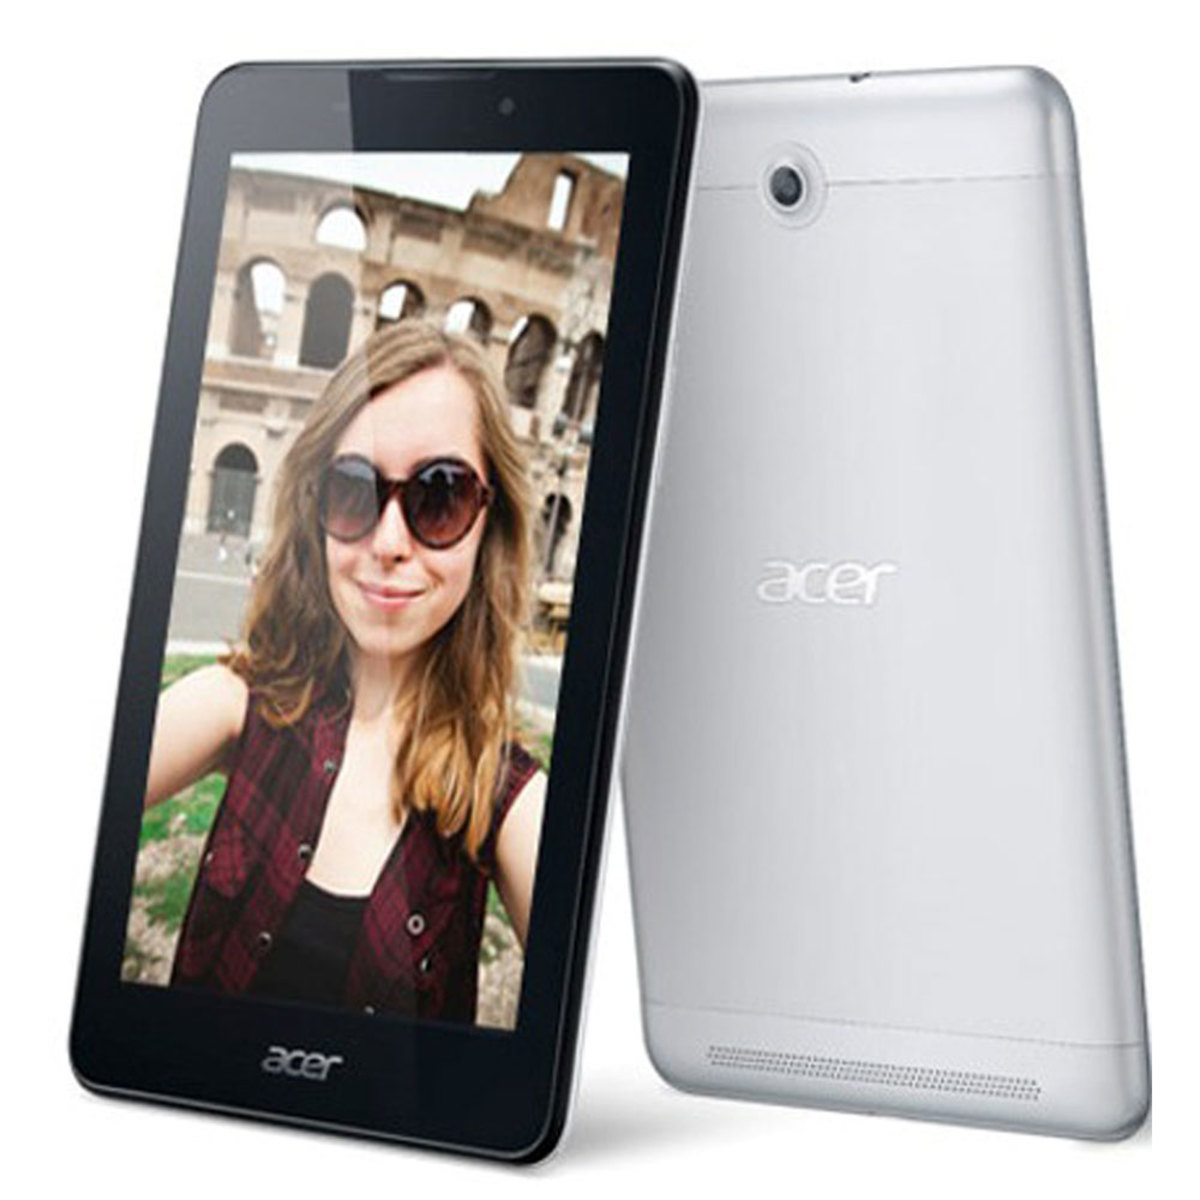 Acer Iconia A1713 Tablet 3G WiFi 7 Inch 16GB Silver